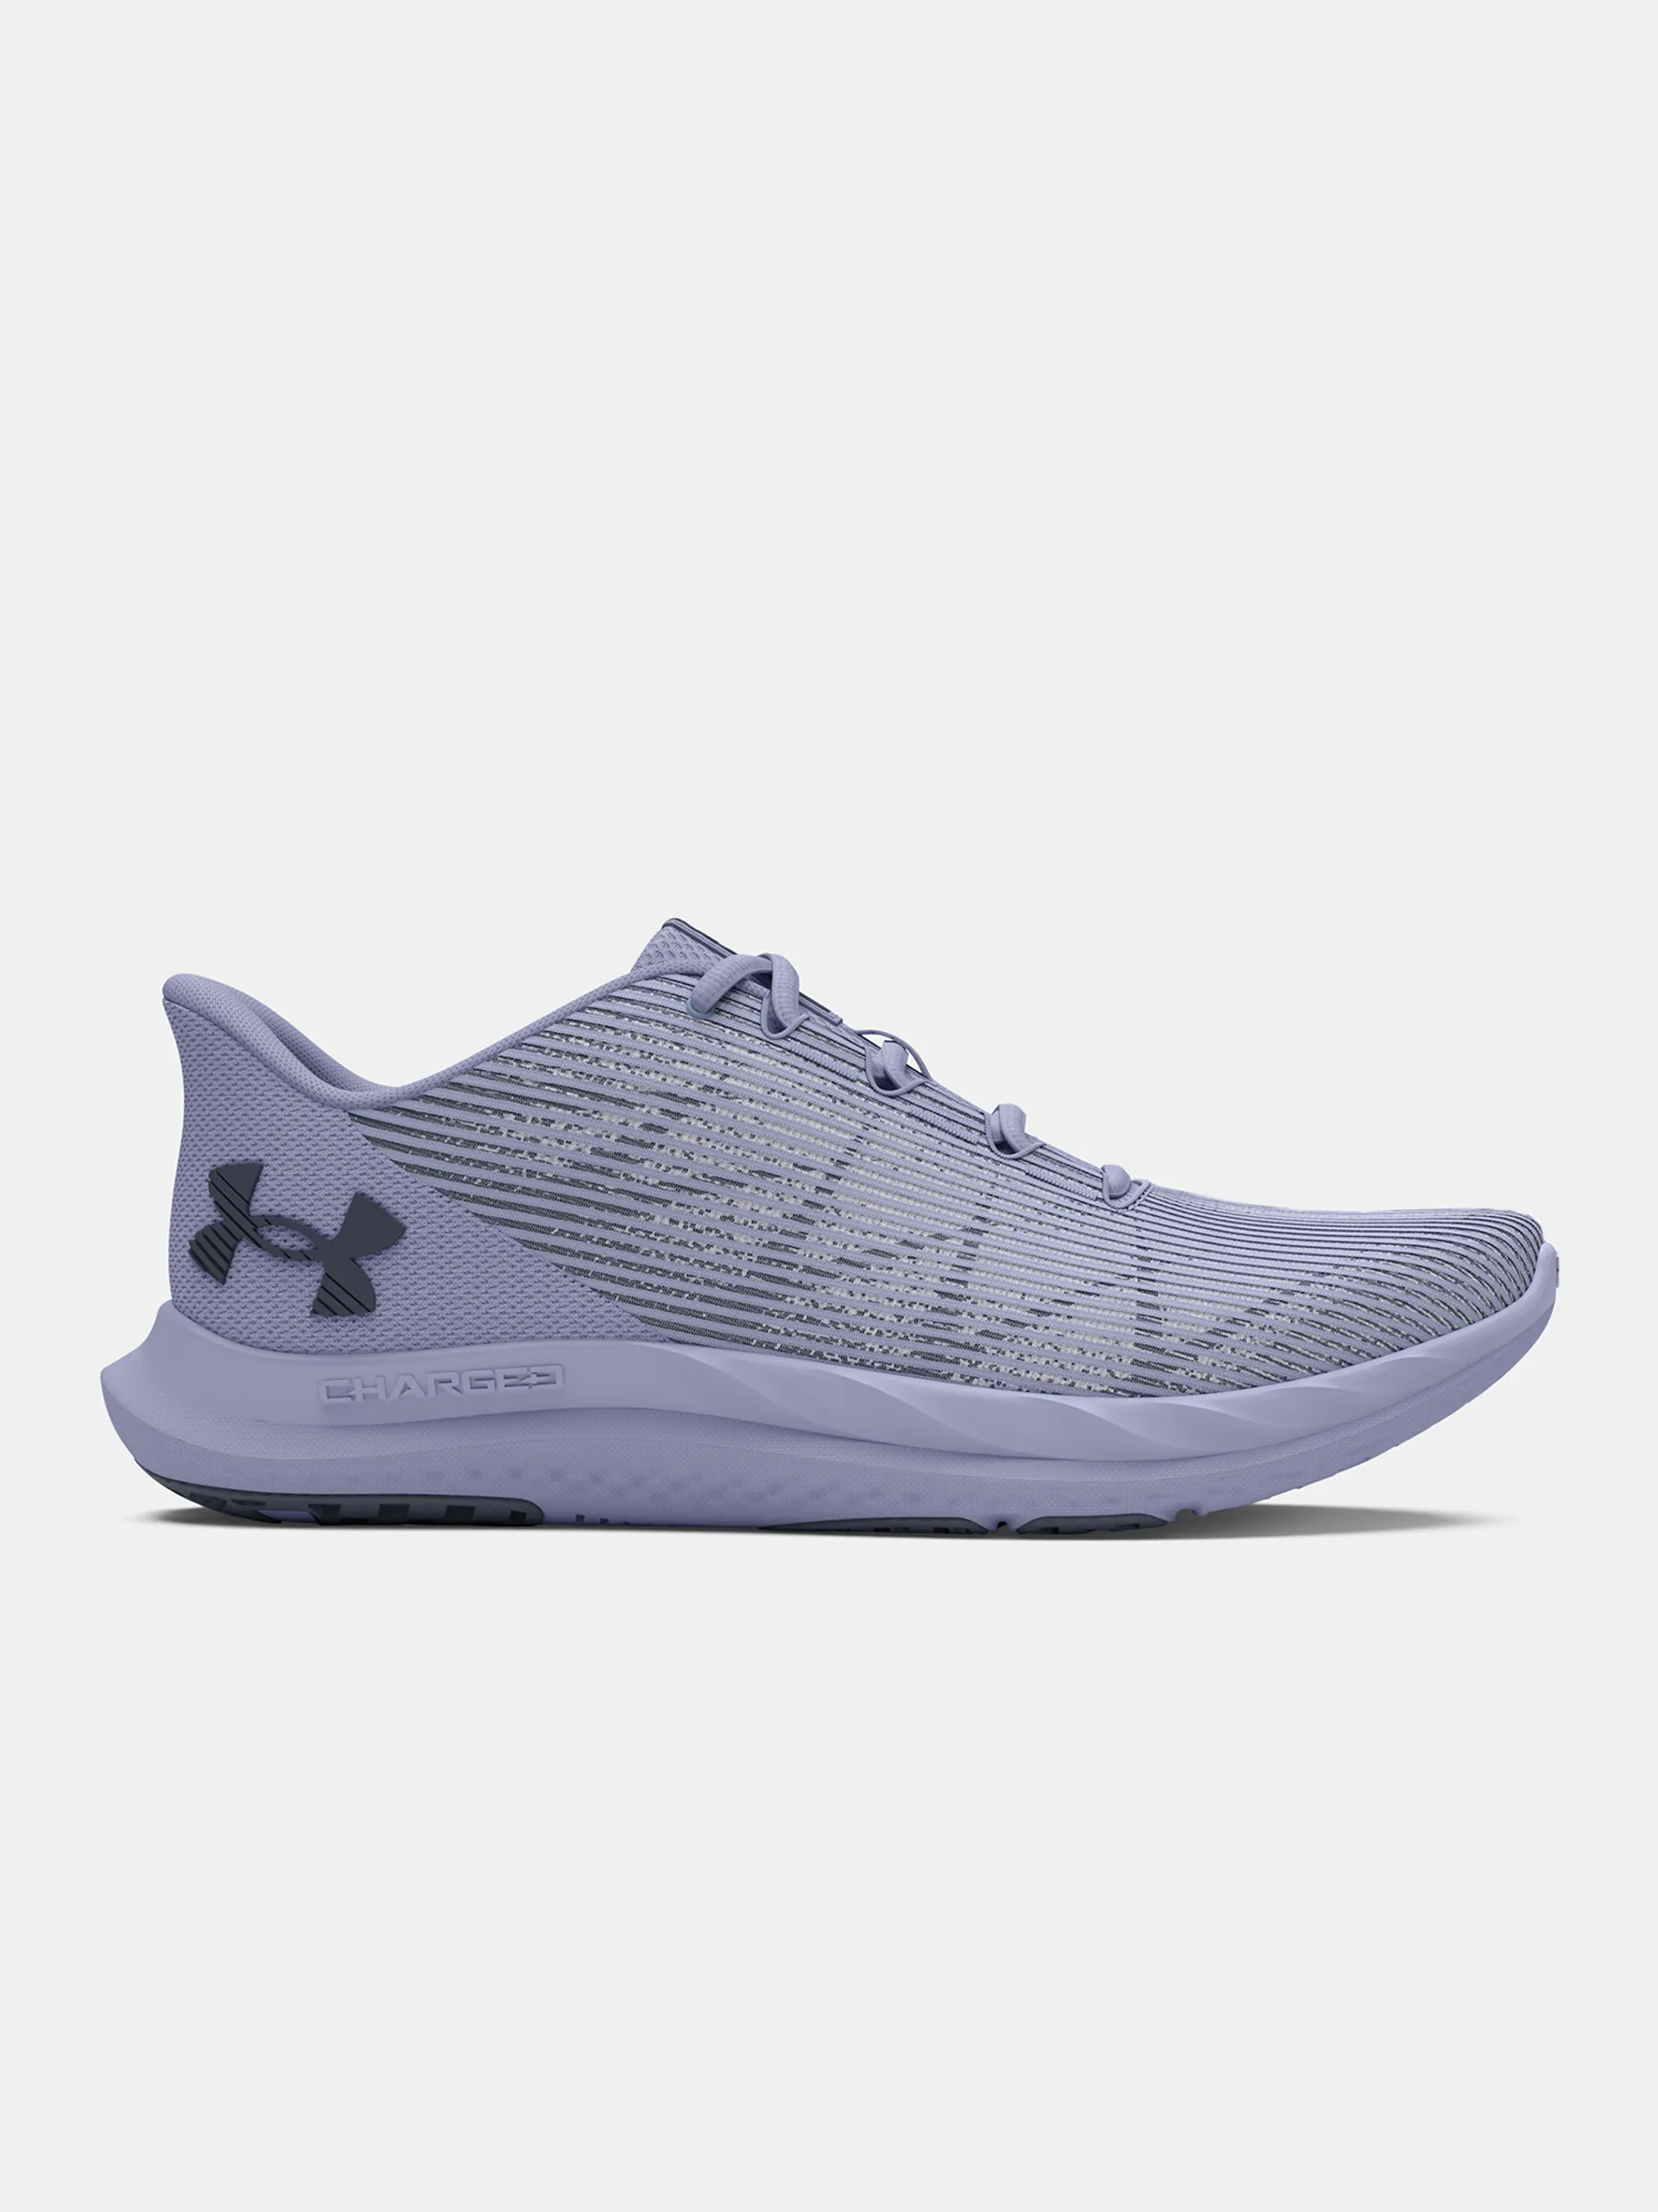 Under Armour Charged Speed Swift Running Shoes